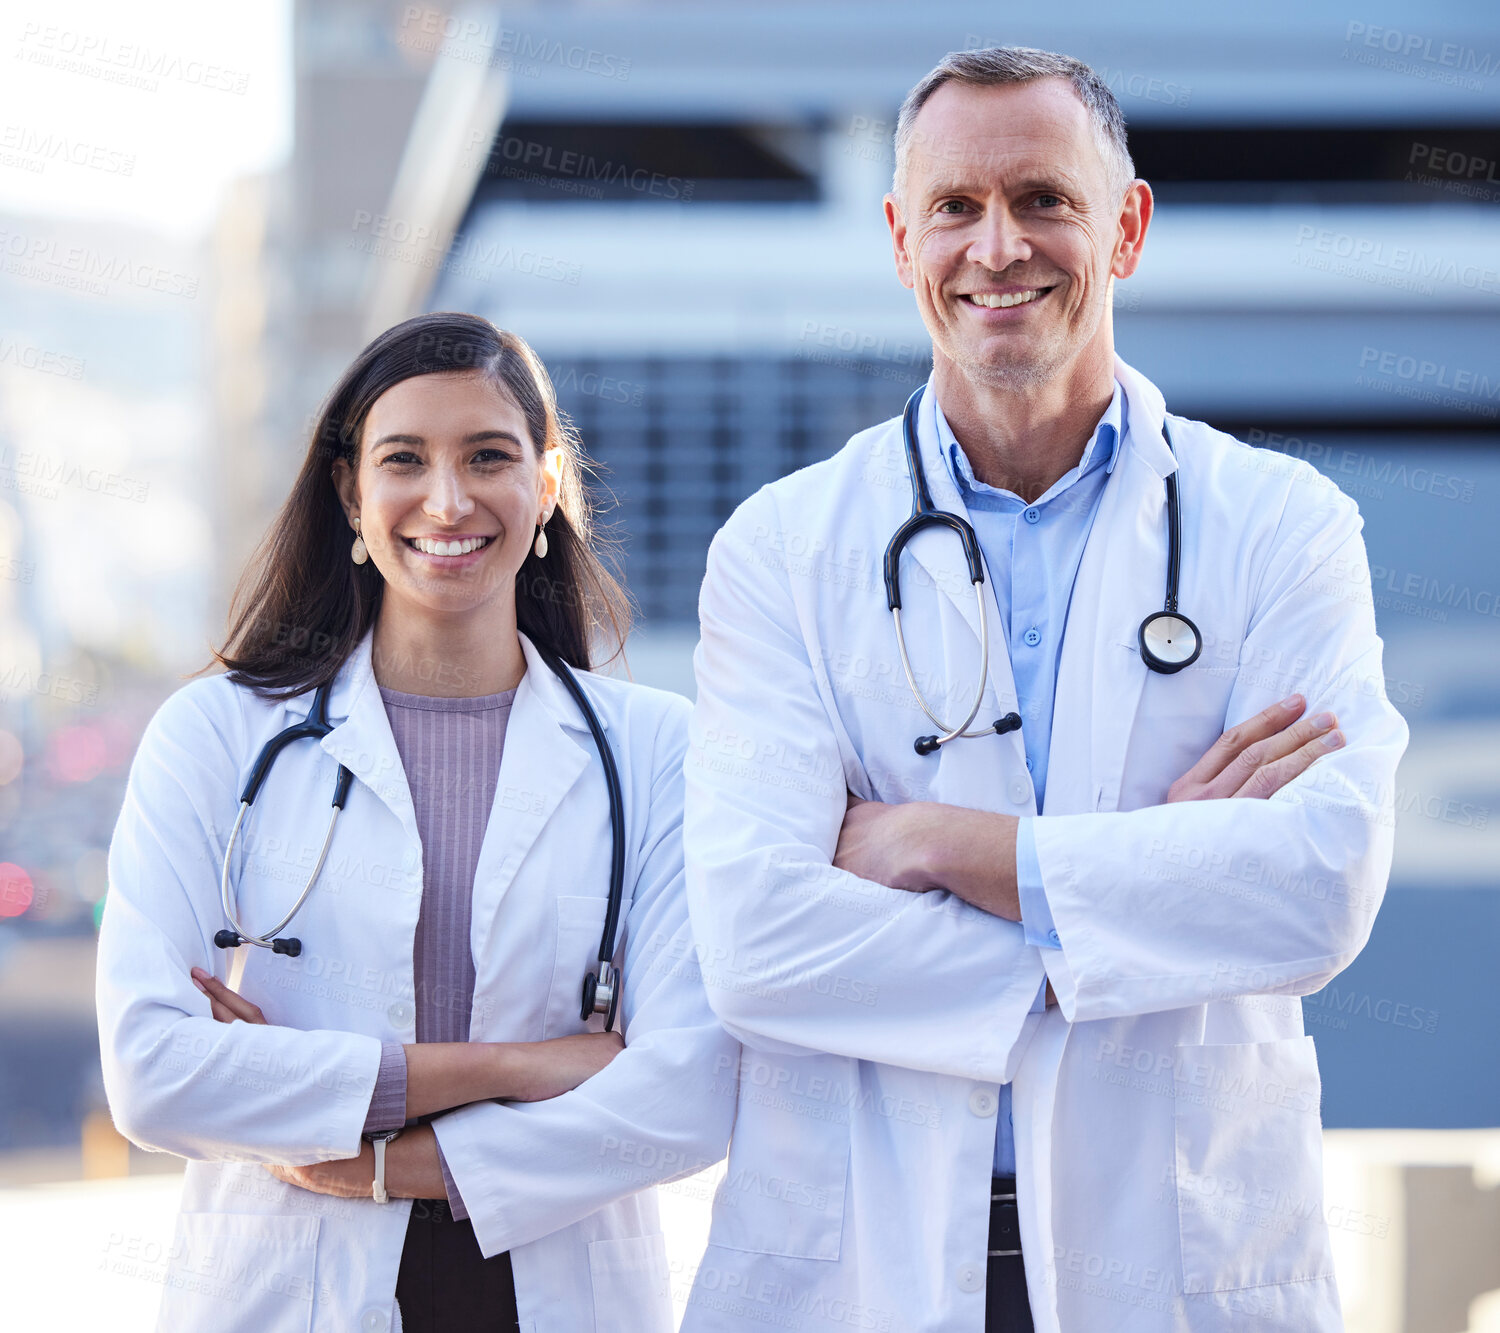 Buy stock photo Man, woman and doctors or portrait with arms crossed fpr teamwork by hospital building, confidence or healthcare. Medical, staff and face with stethoscope together for research, partnership or pride